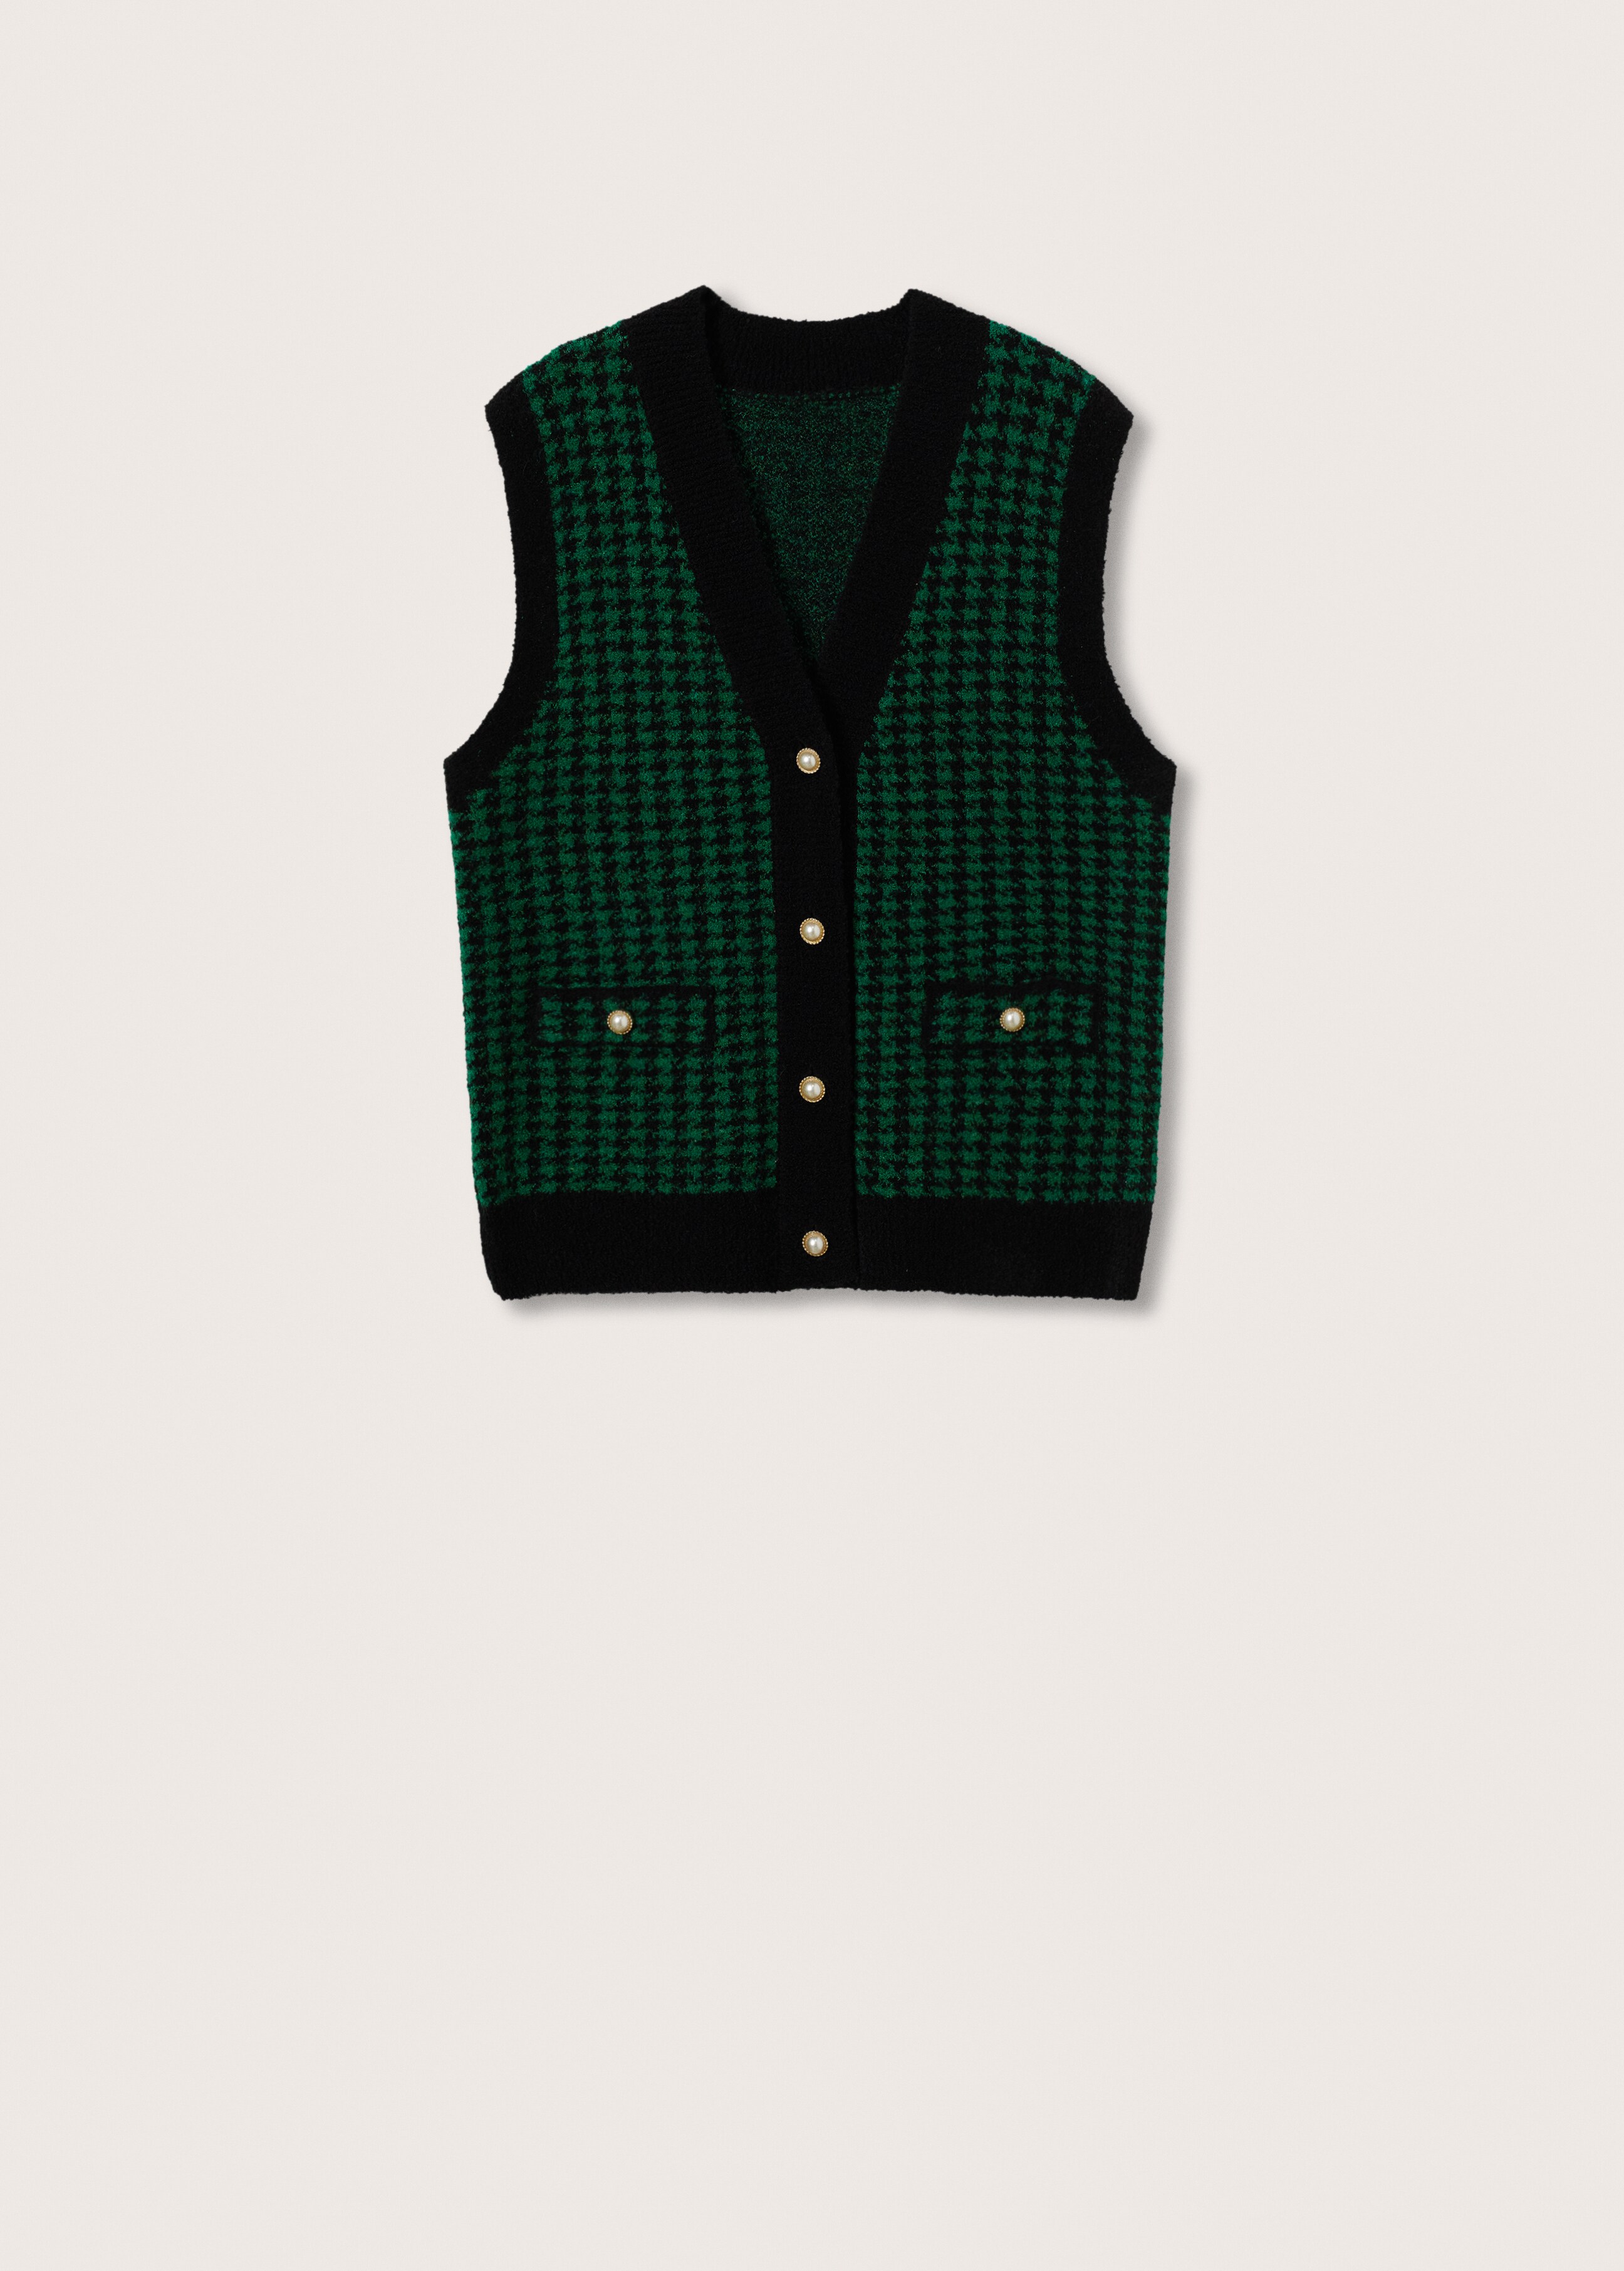 Houndstooth vest - Article without model